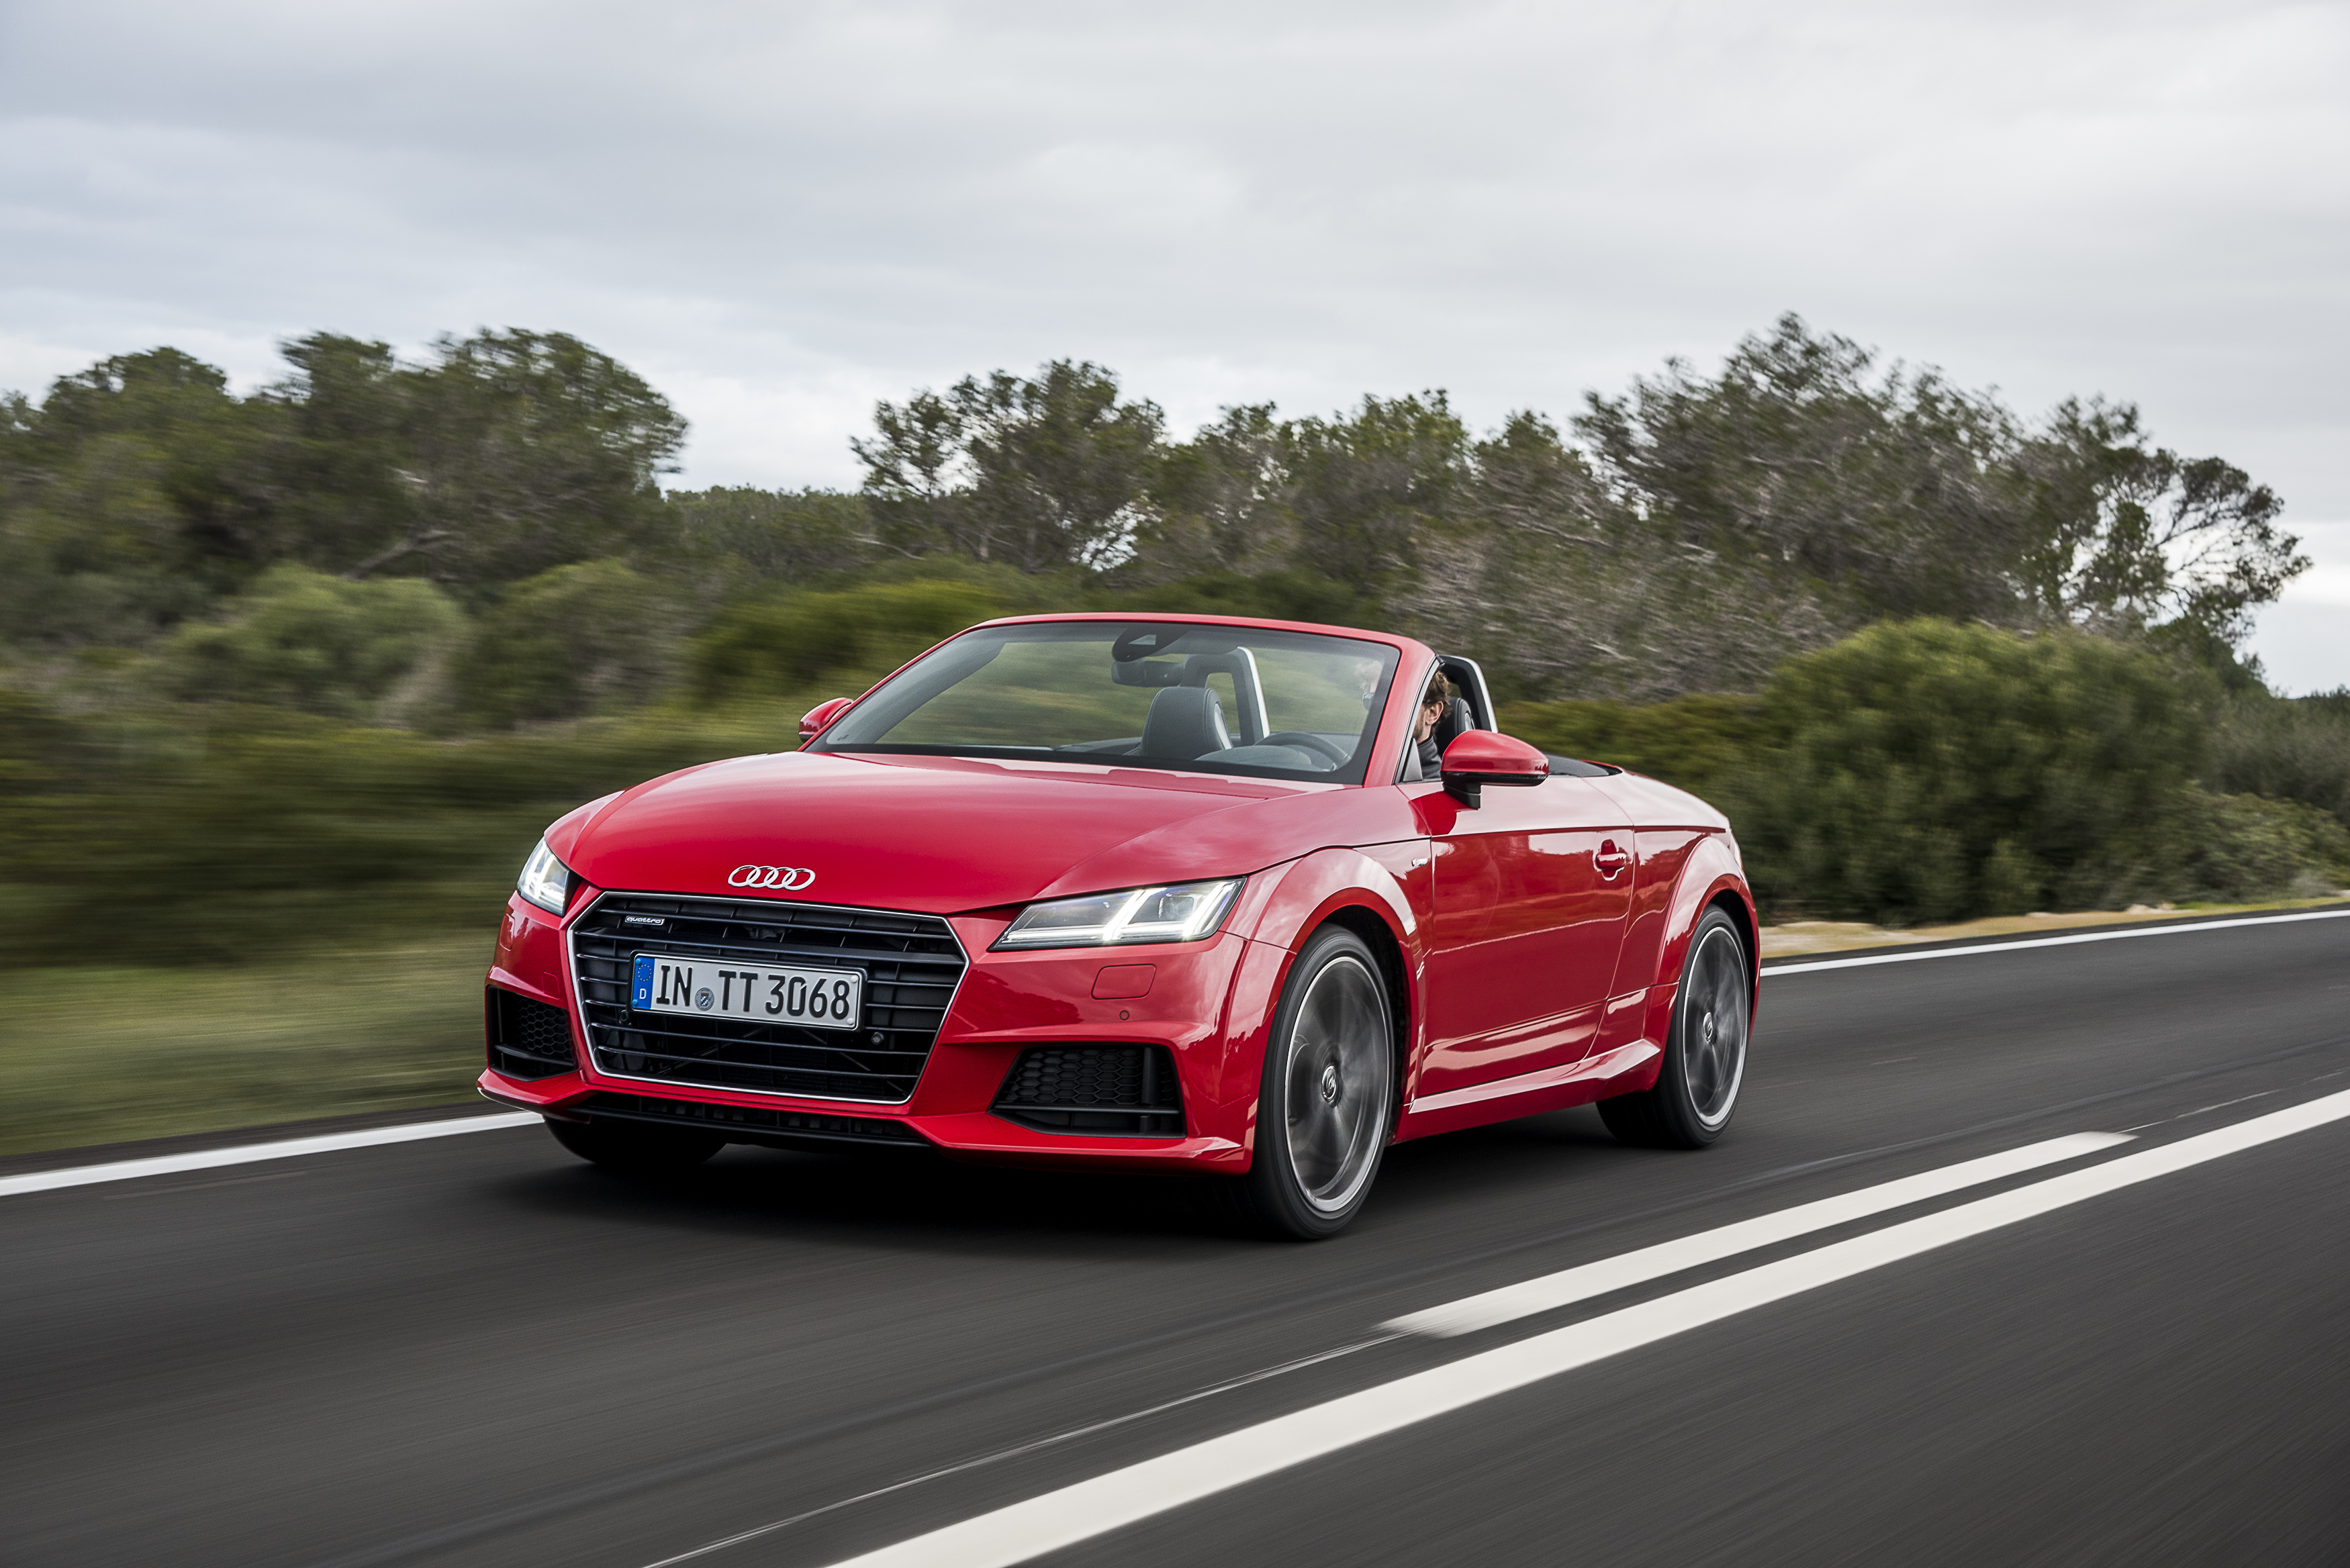 Audi TT Roadster 2.0 TFSI review - specifications, pictures, 0-60